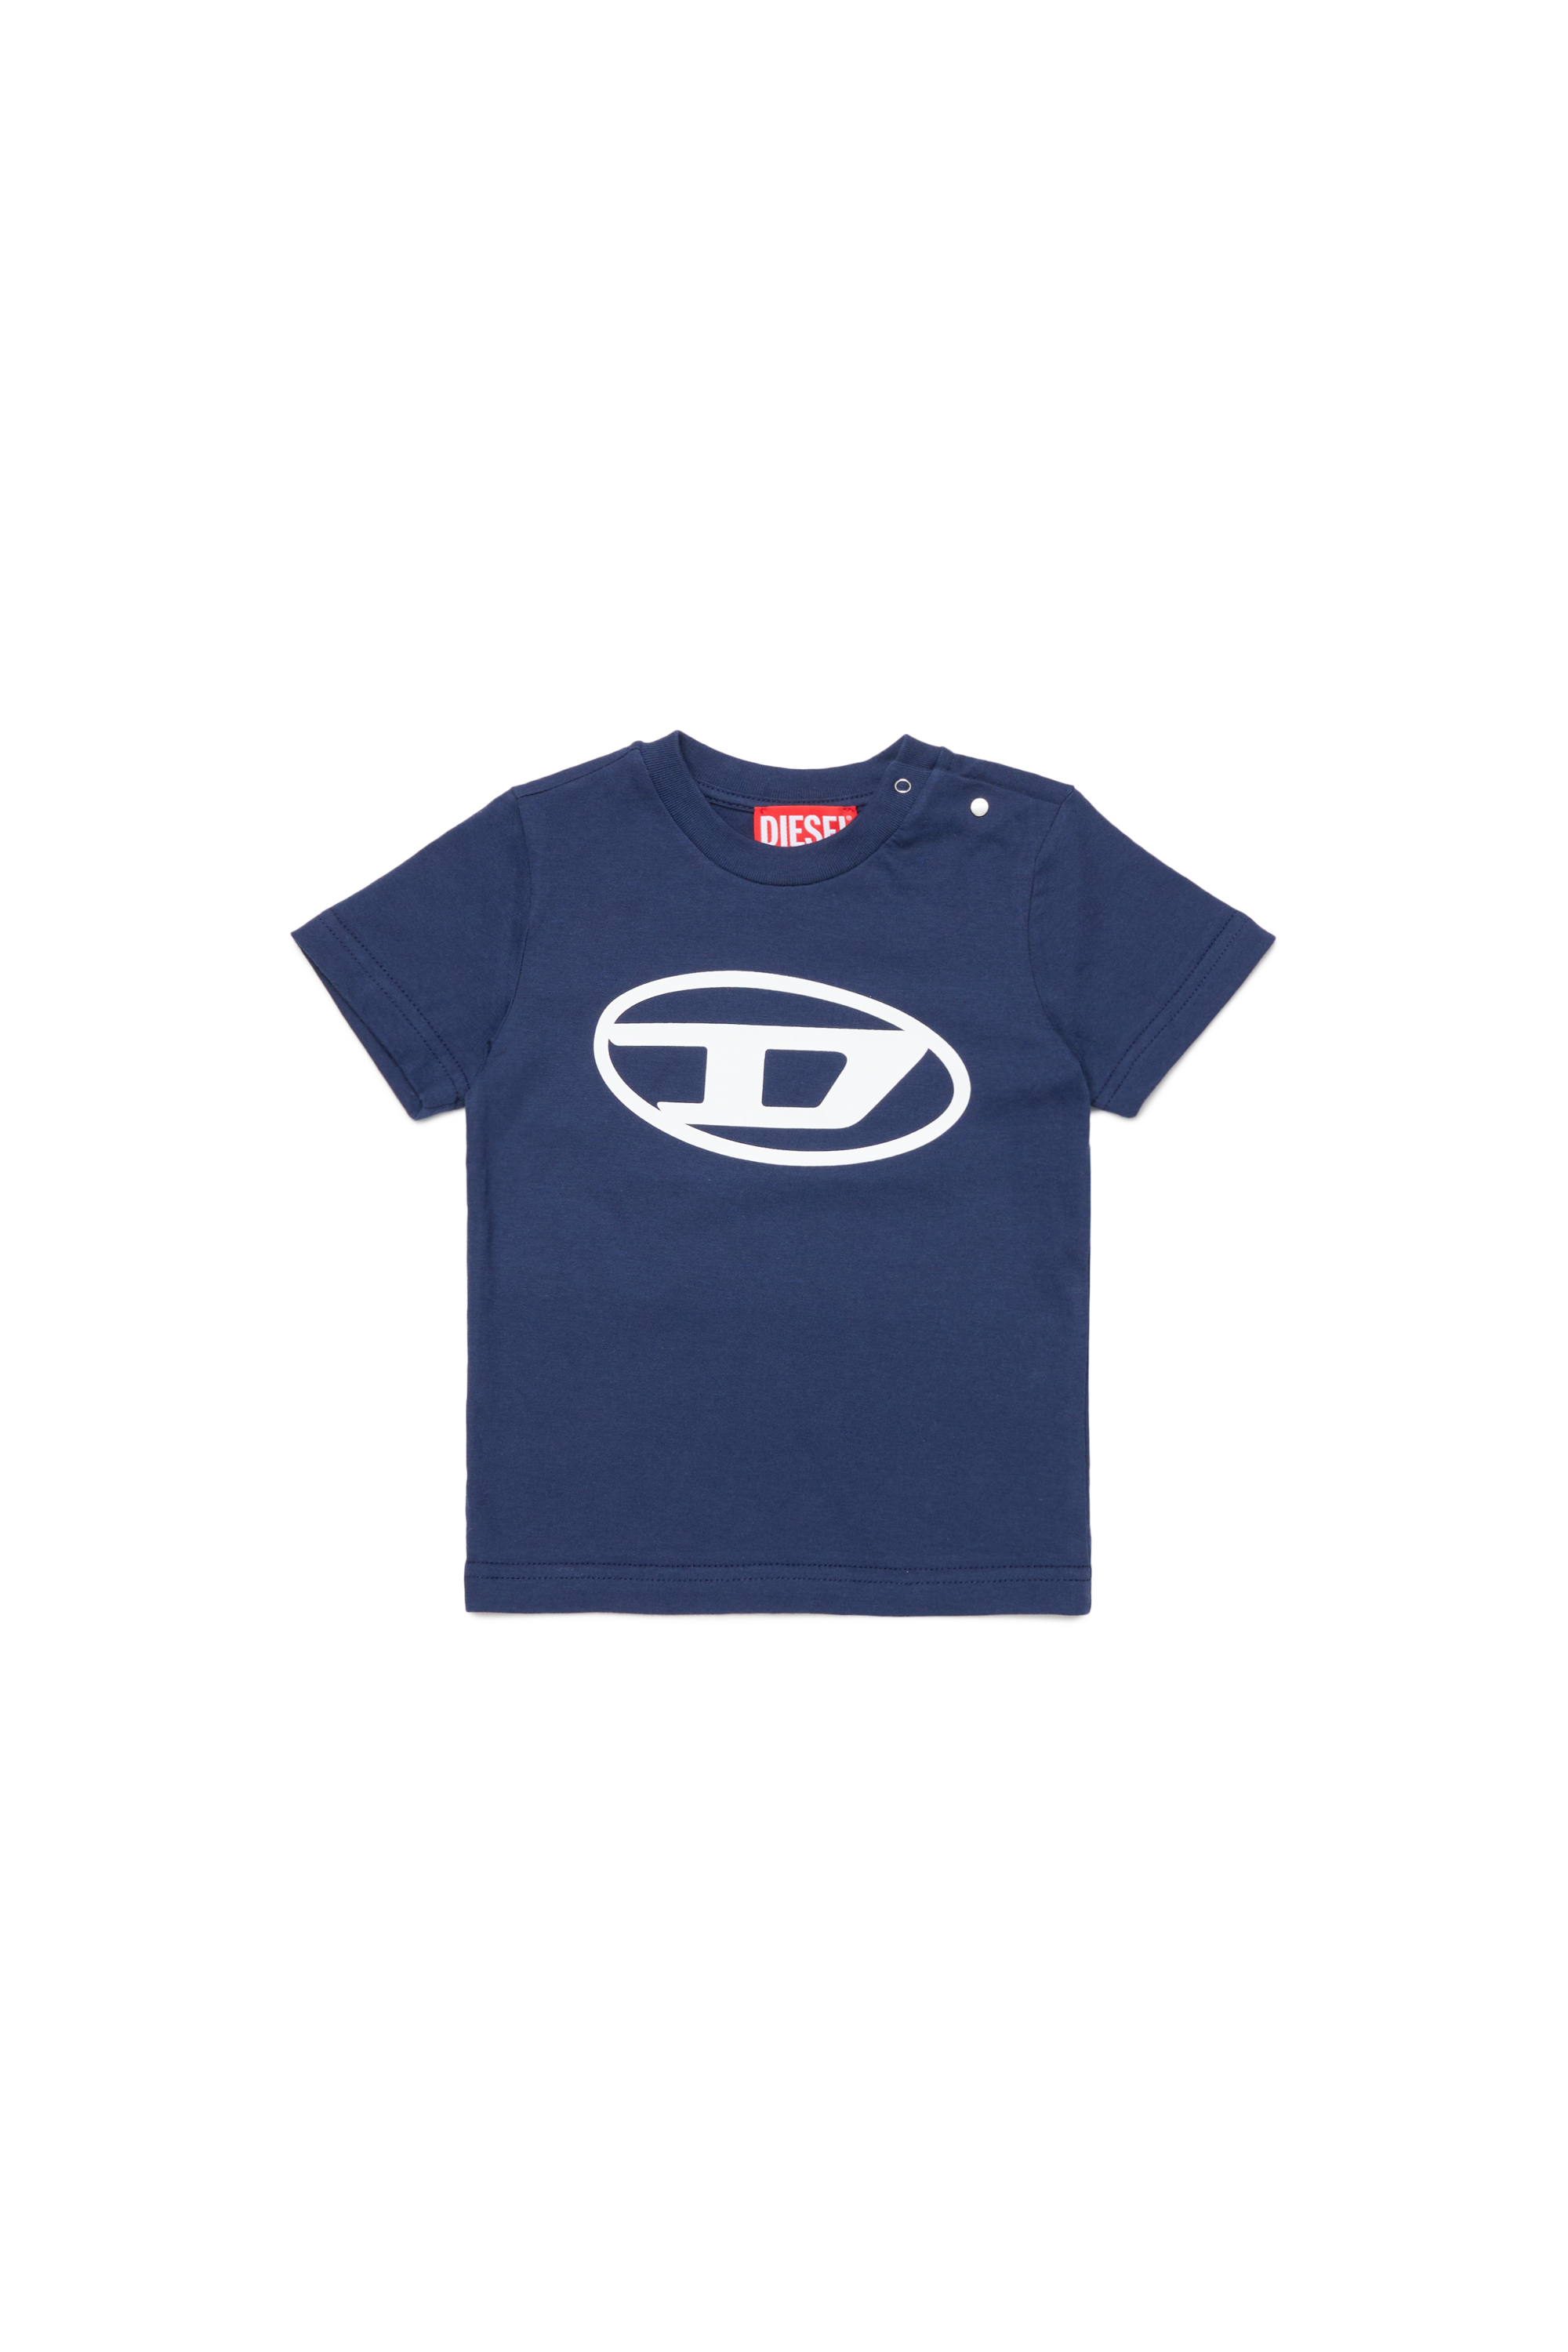 Diesel - TCERB, Unisex T-shirt with Oval D logo in Blue - Image 1